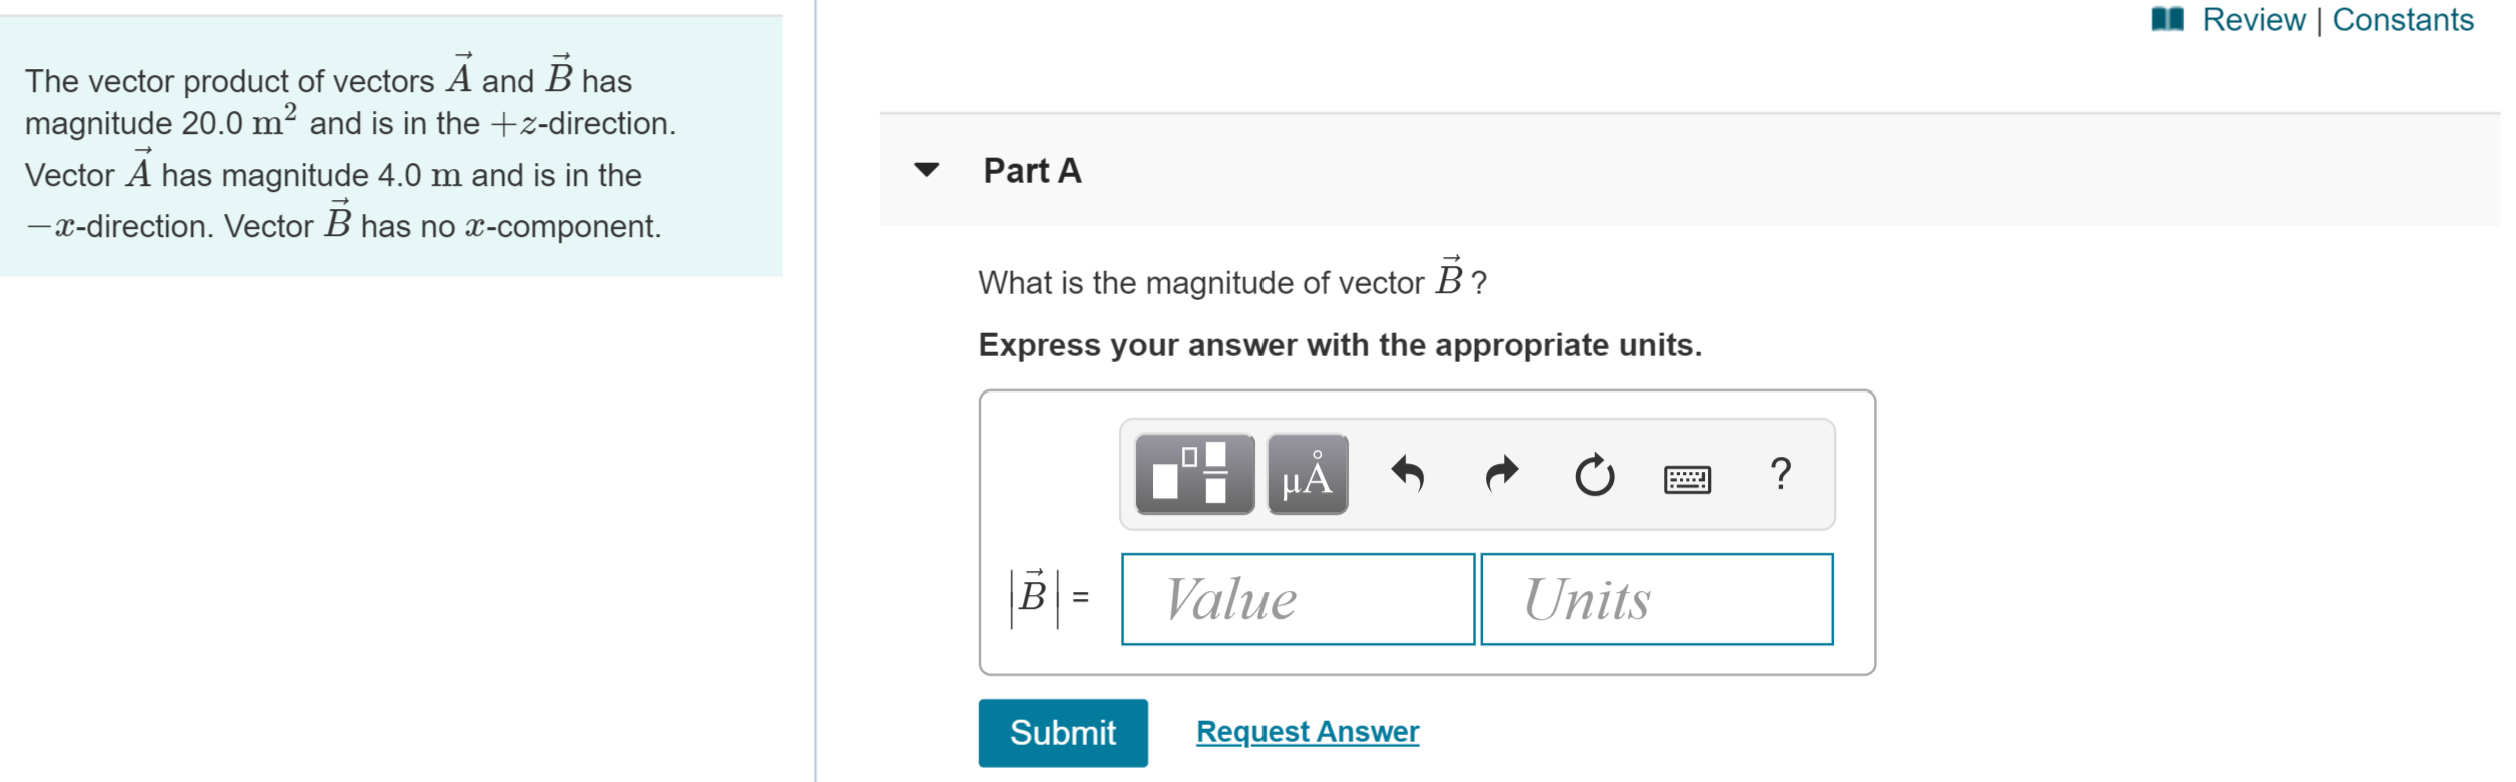 Review | Constants
The vector product of vectors A and B has
magnitude 20.0 m2 and is in the +z-direction
Part A
Vector A has magnitude 4.0 m and is in the
-x-direction. Vector B has no x-component.
What is the magnitude of vector B?
Express your answer with the appropriate units.
?
НА
|B =
Value
Units
Request Answer
Submit
